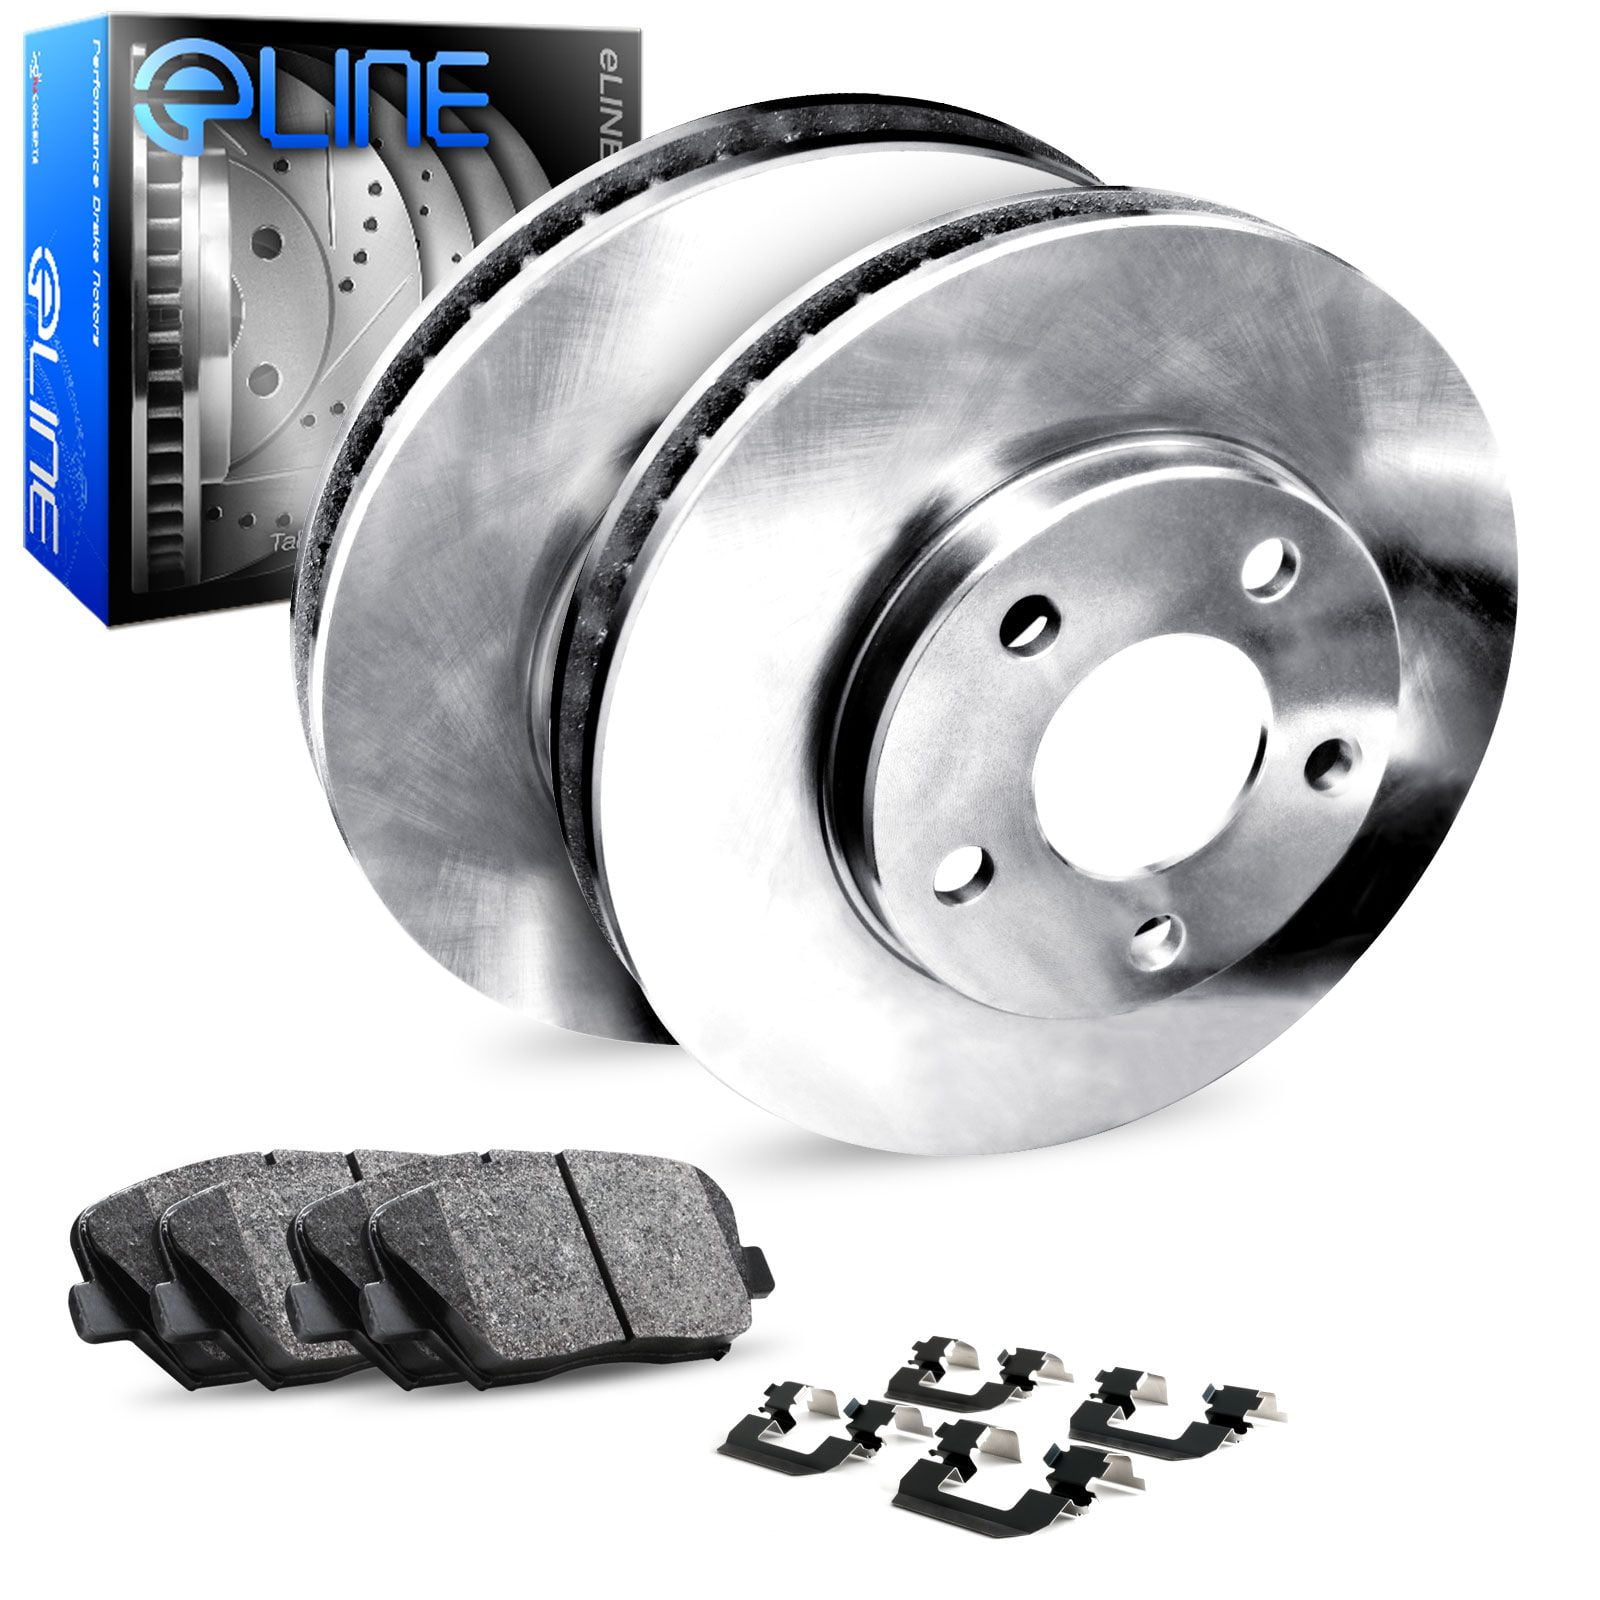 For 1998 1999 ACURA CL V6 3.0L Front And Rear Brake Disc Rotors & Ceramic Pads